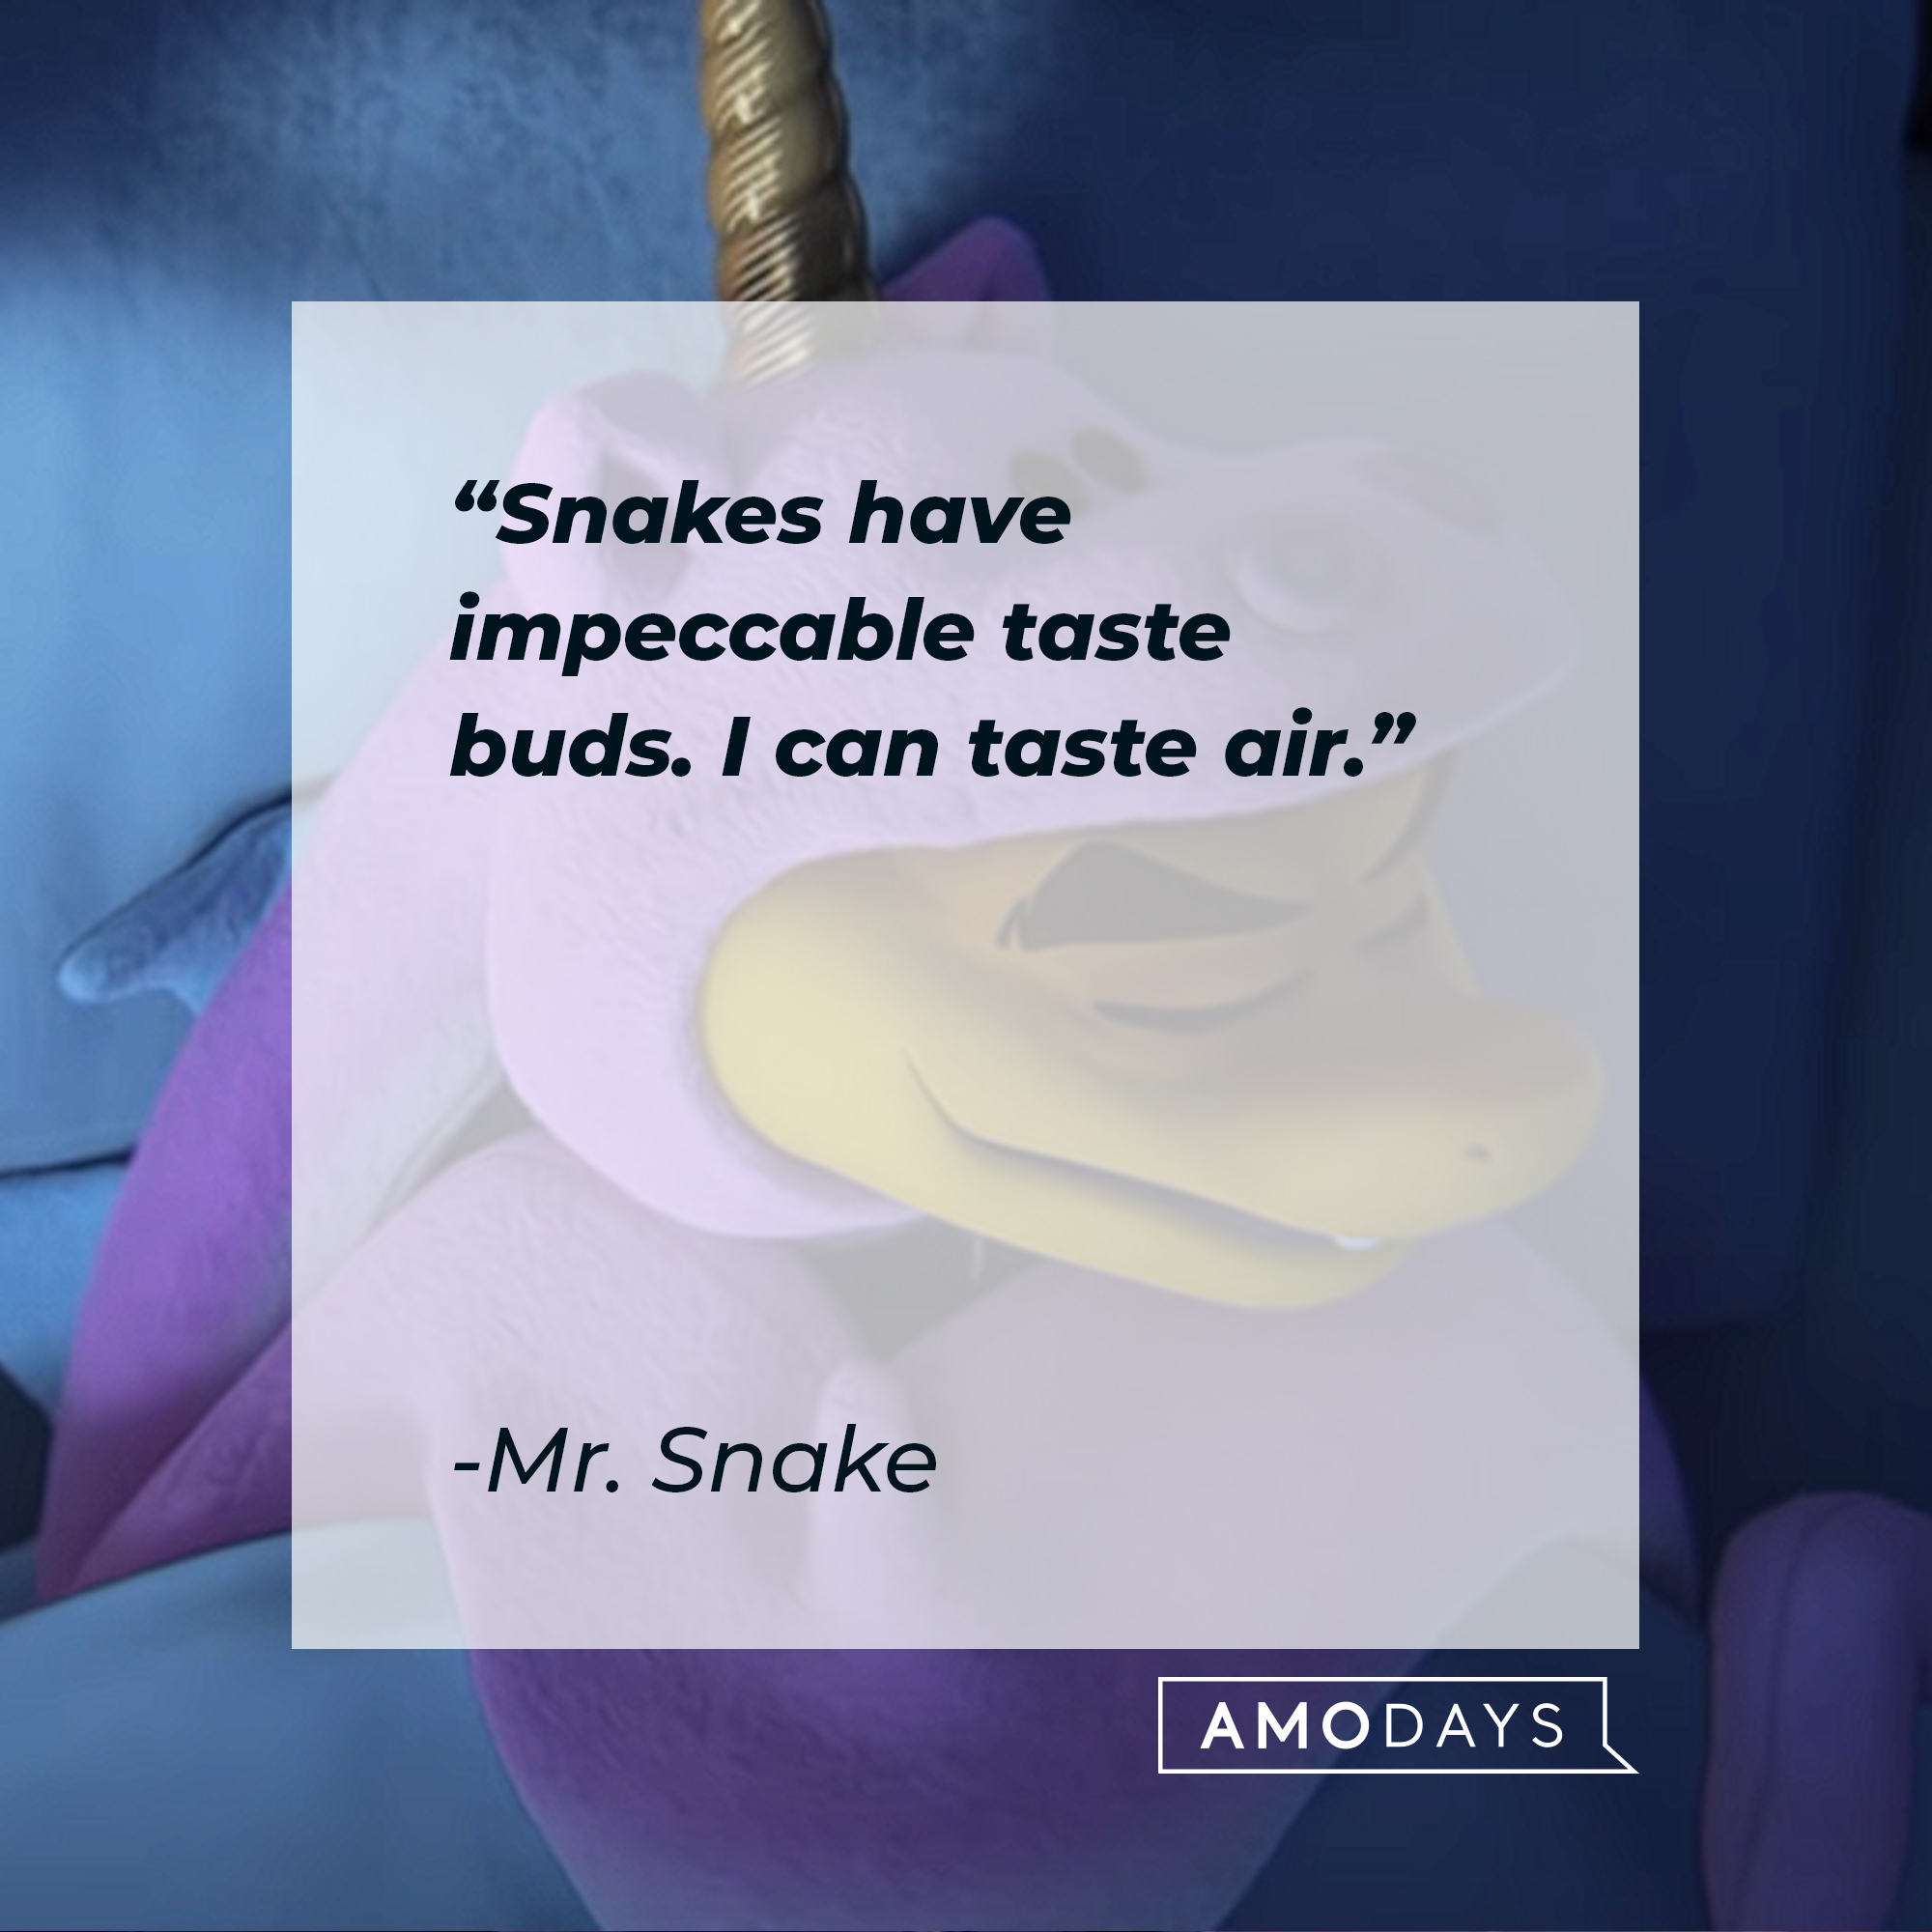 Mr. Snake's quote: "Snakes have impeccable taste buds. I can taste air." | Source: youtube.com/UniversalPictures